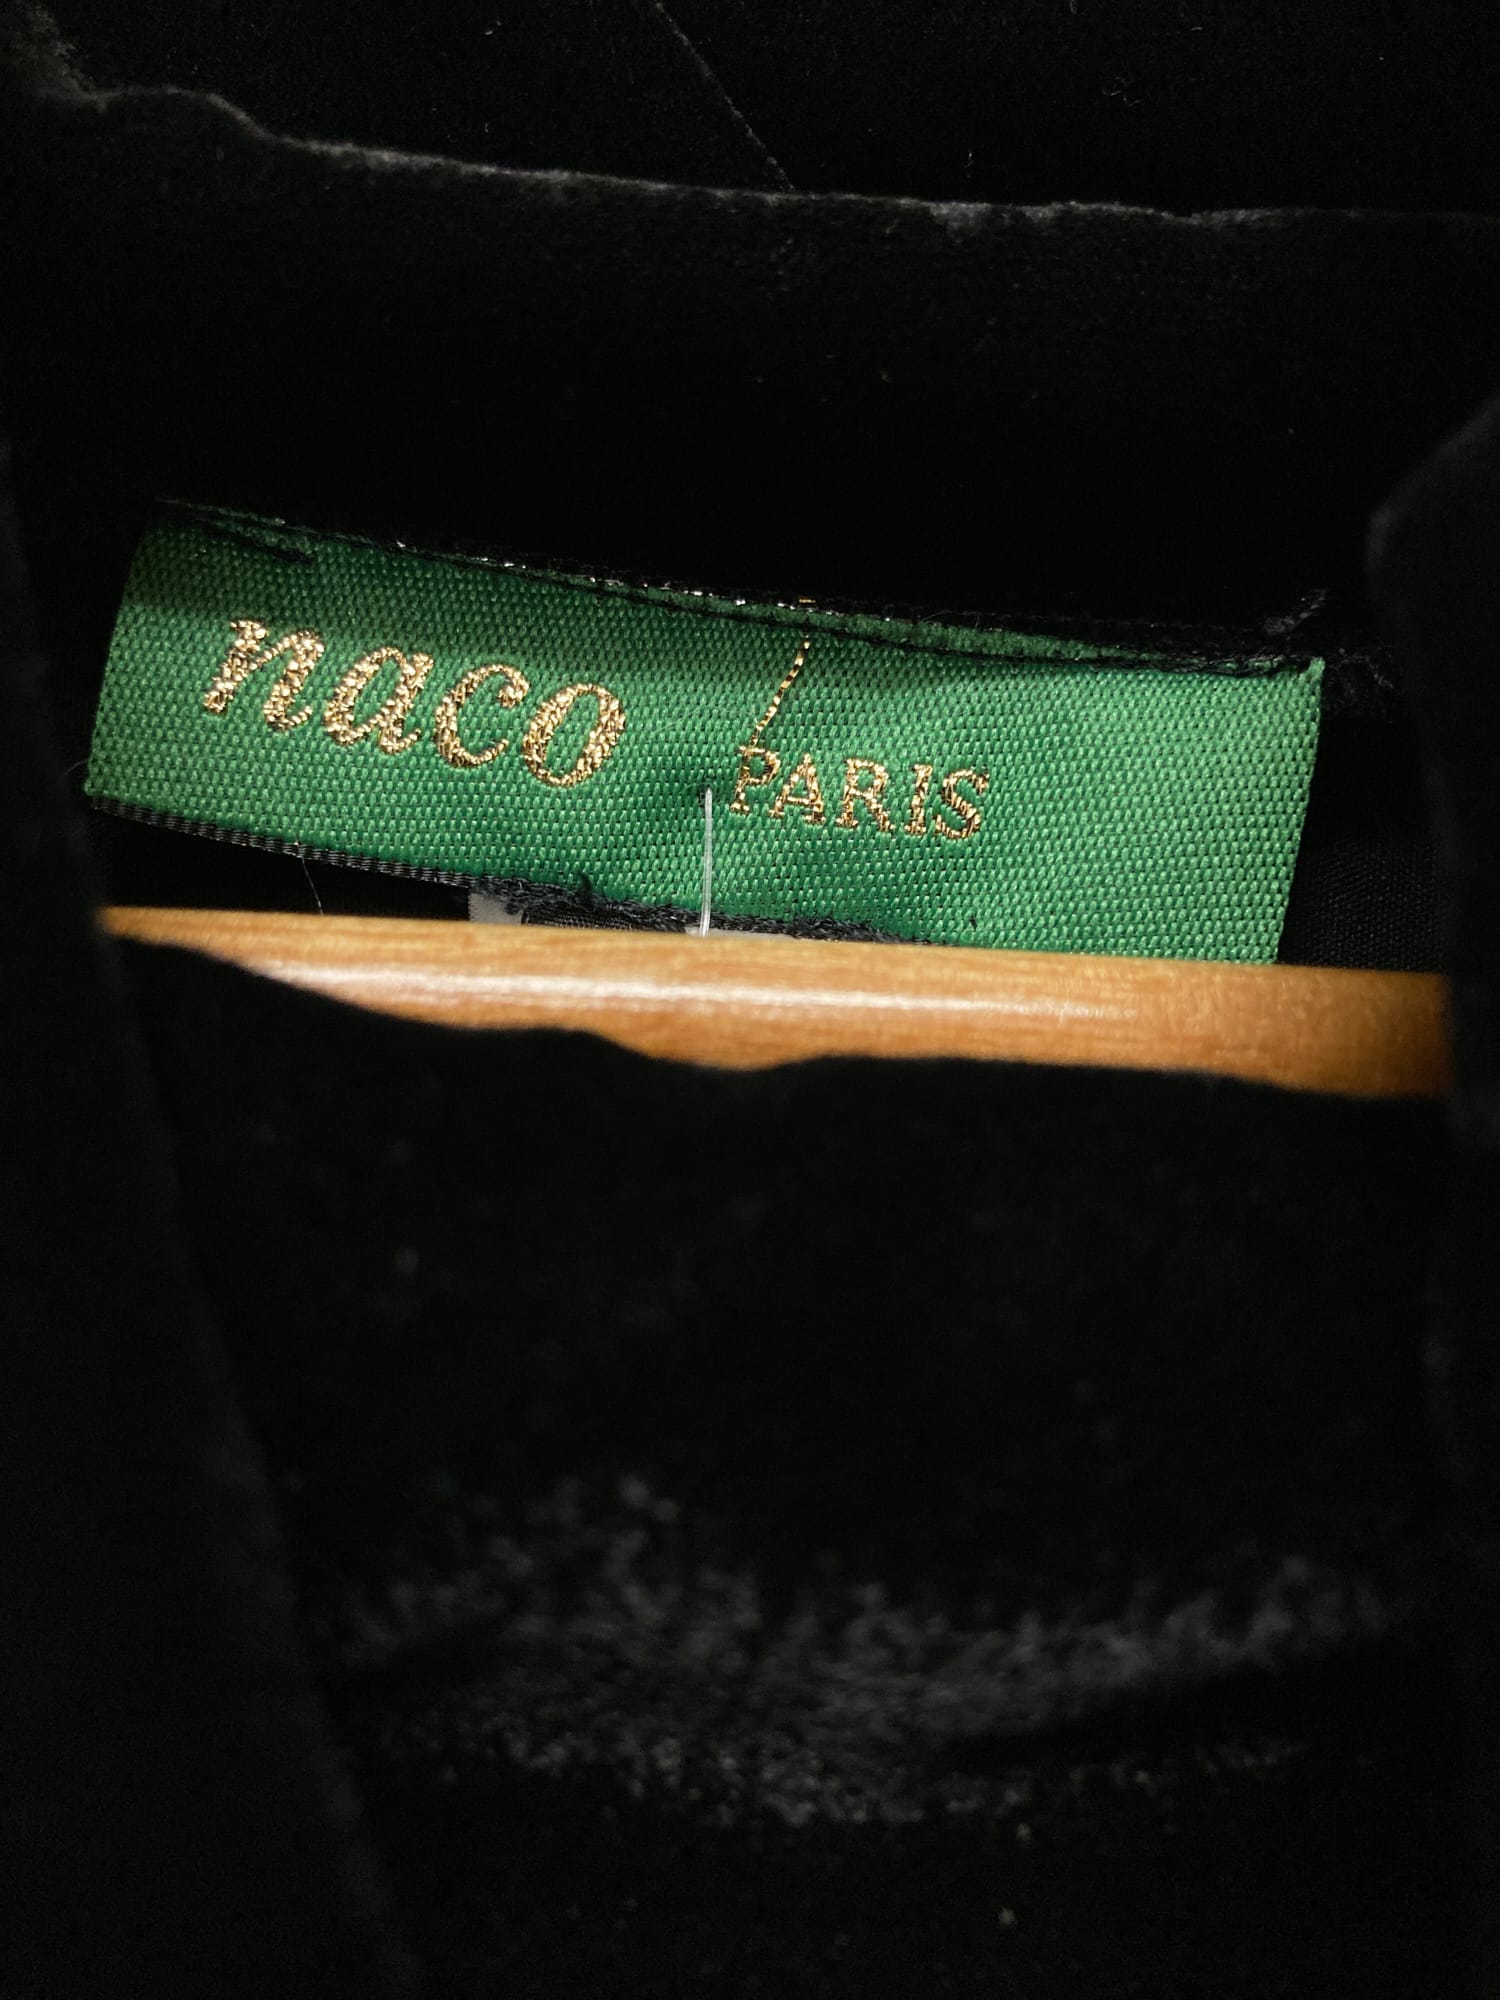 Naco Paris black velour dog print top with applique ribbons and nose ring